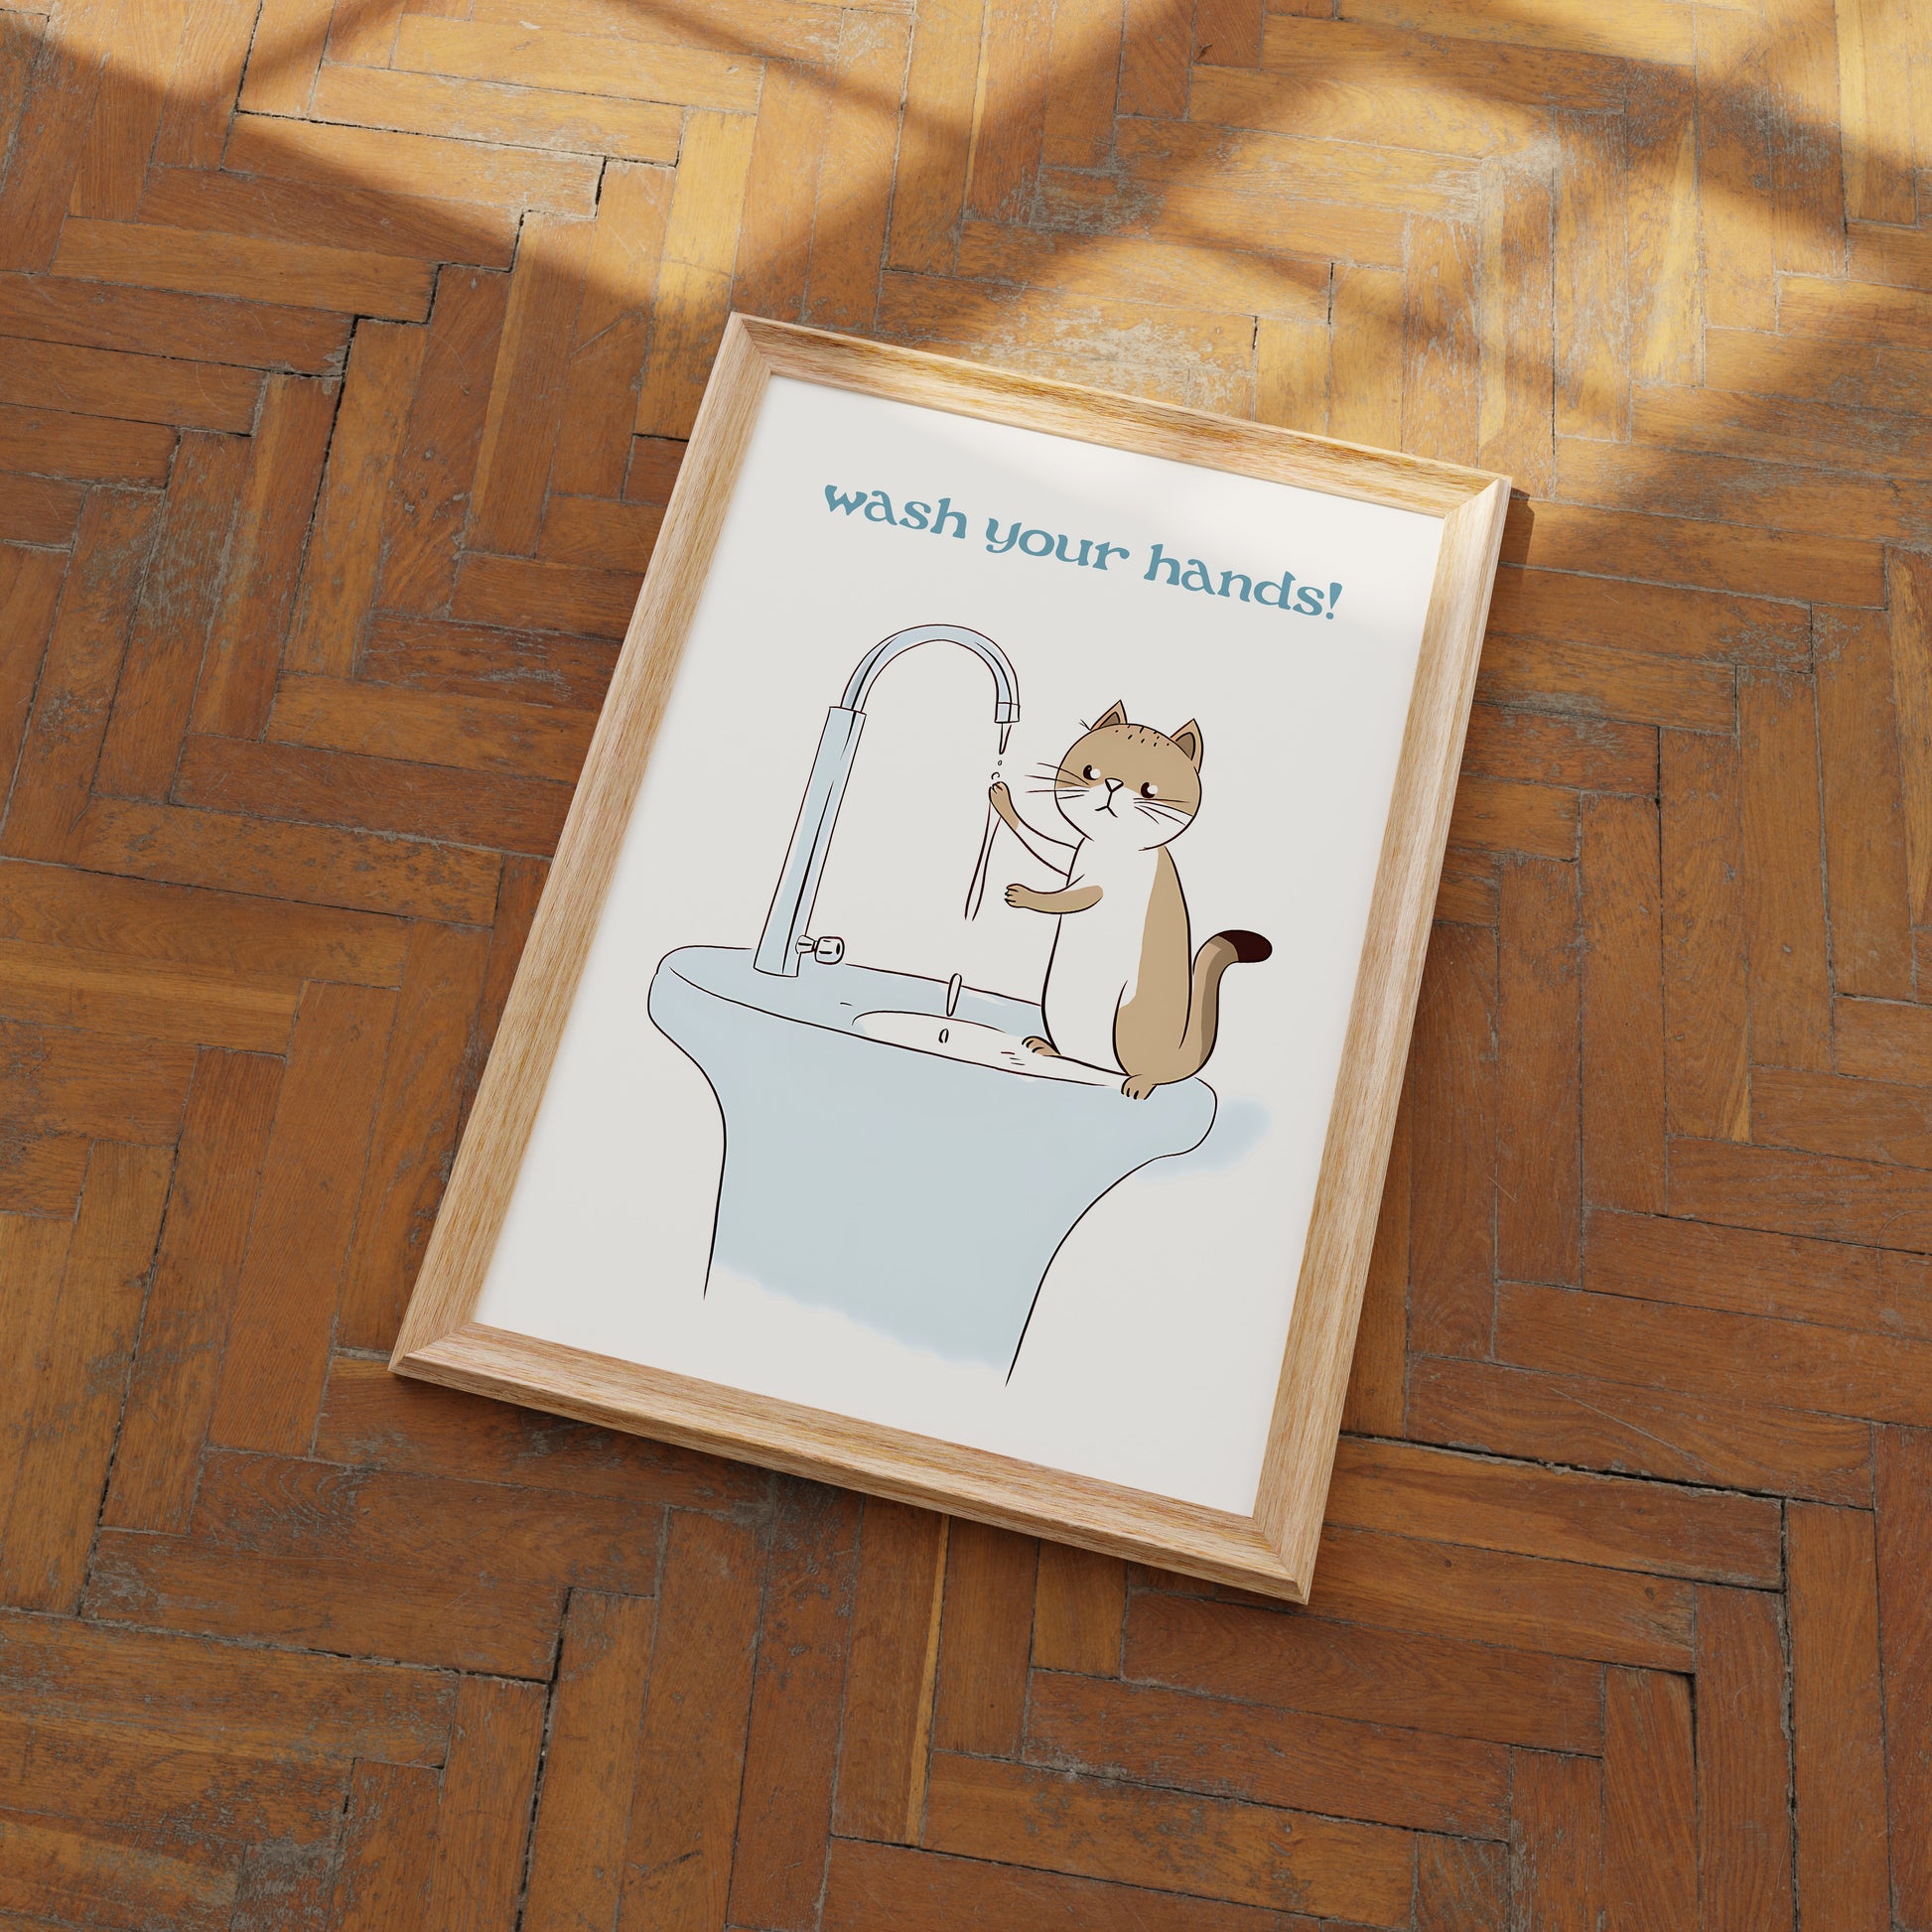 Illustration of a cat washing its paws over a sink with text "wash your hands!" in a frame on a wooden floor.